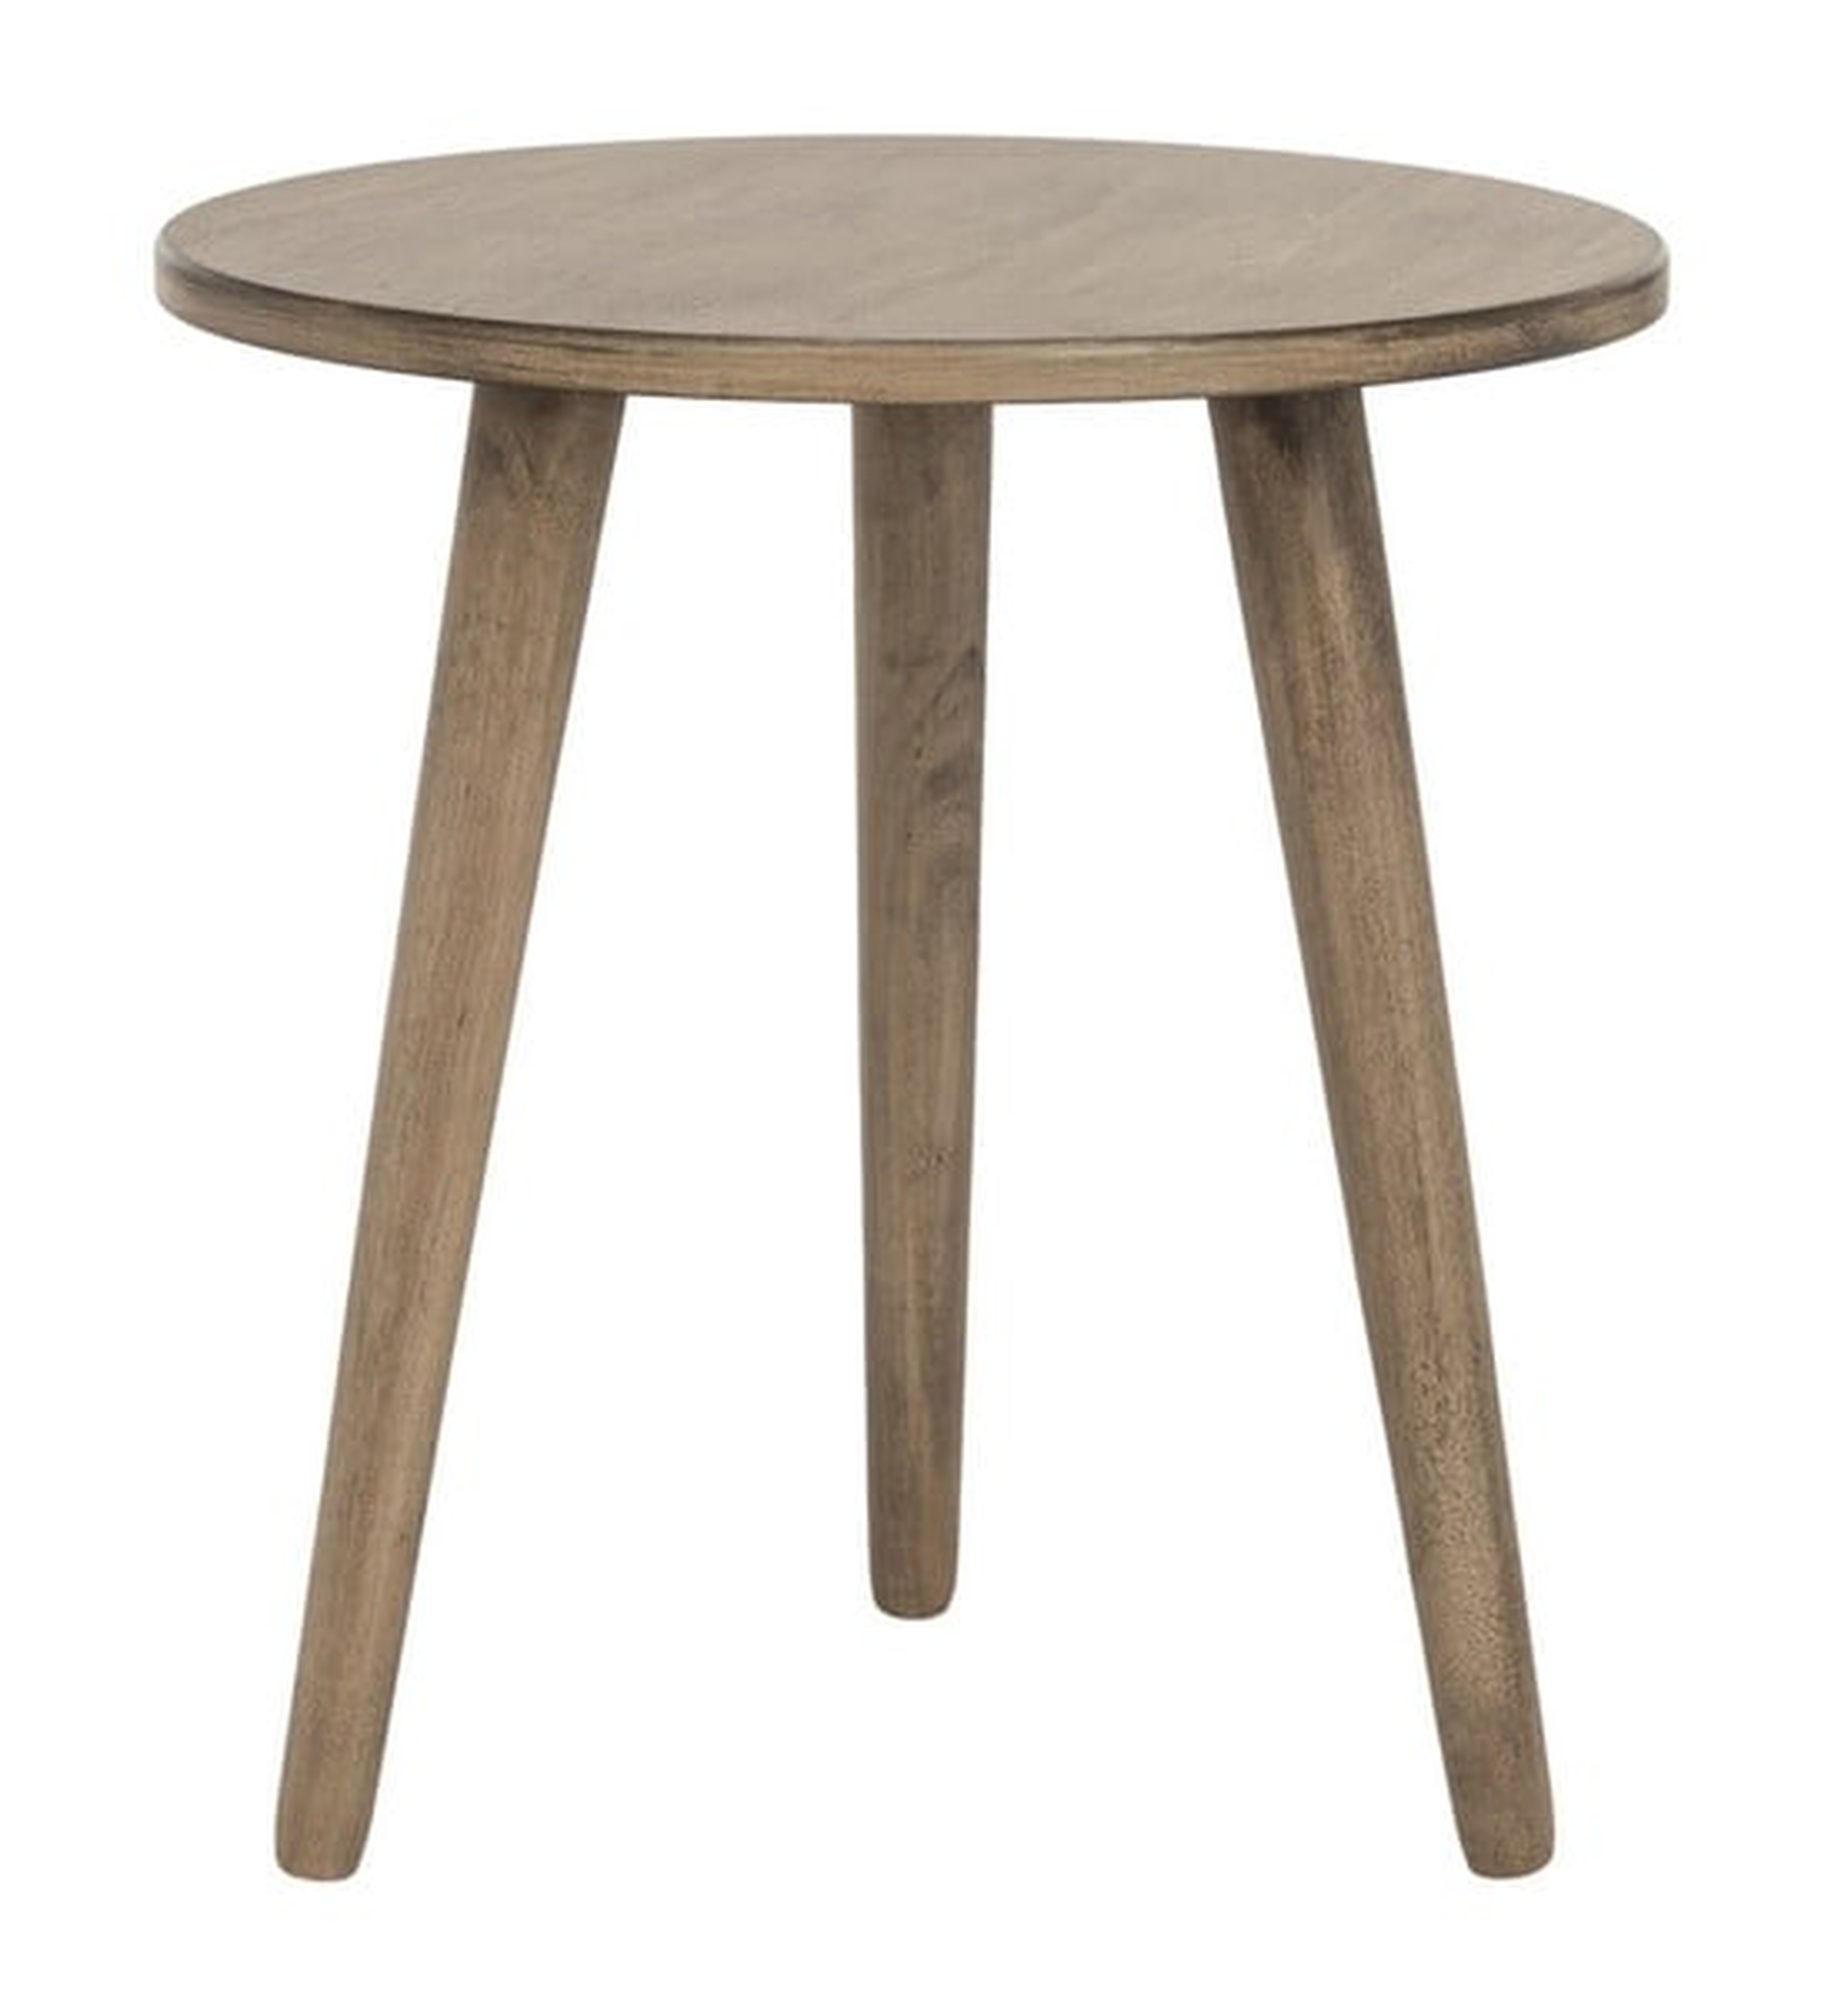 Orion Round Accent Table - Desert Brown - Arlo Home - Arlo Home